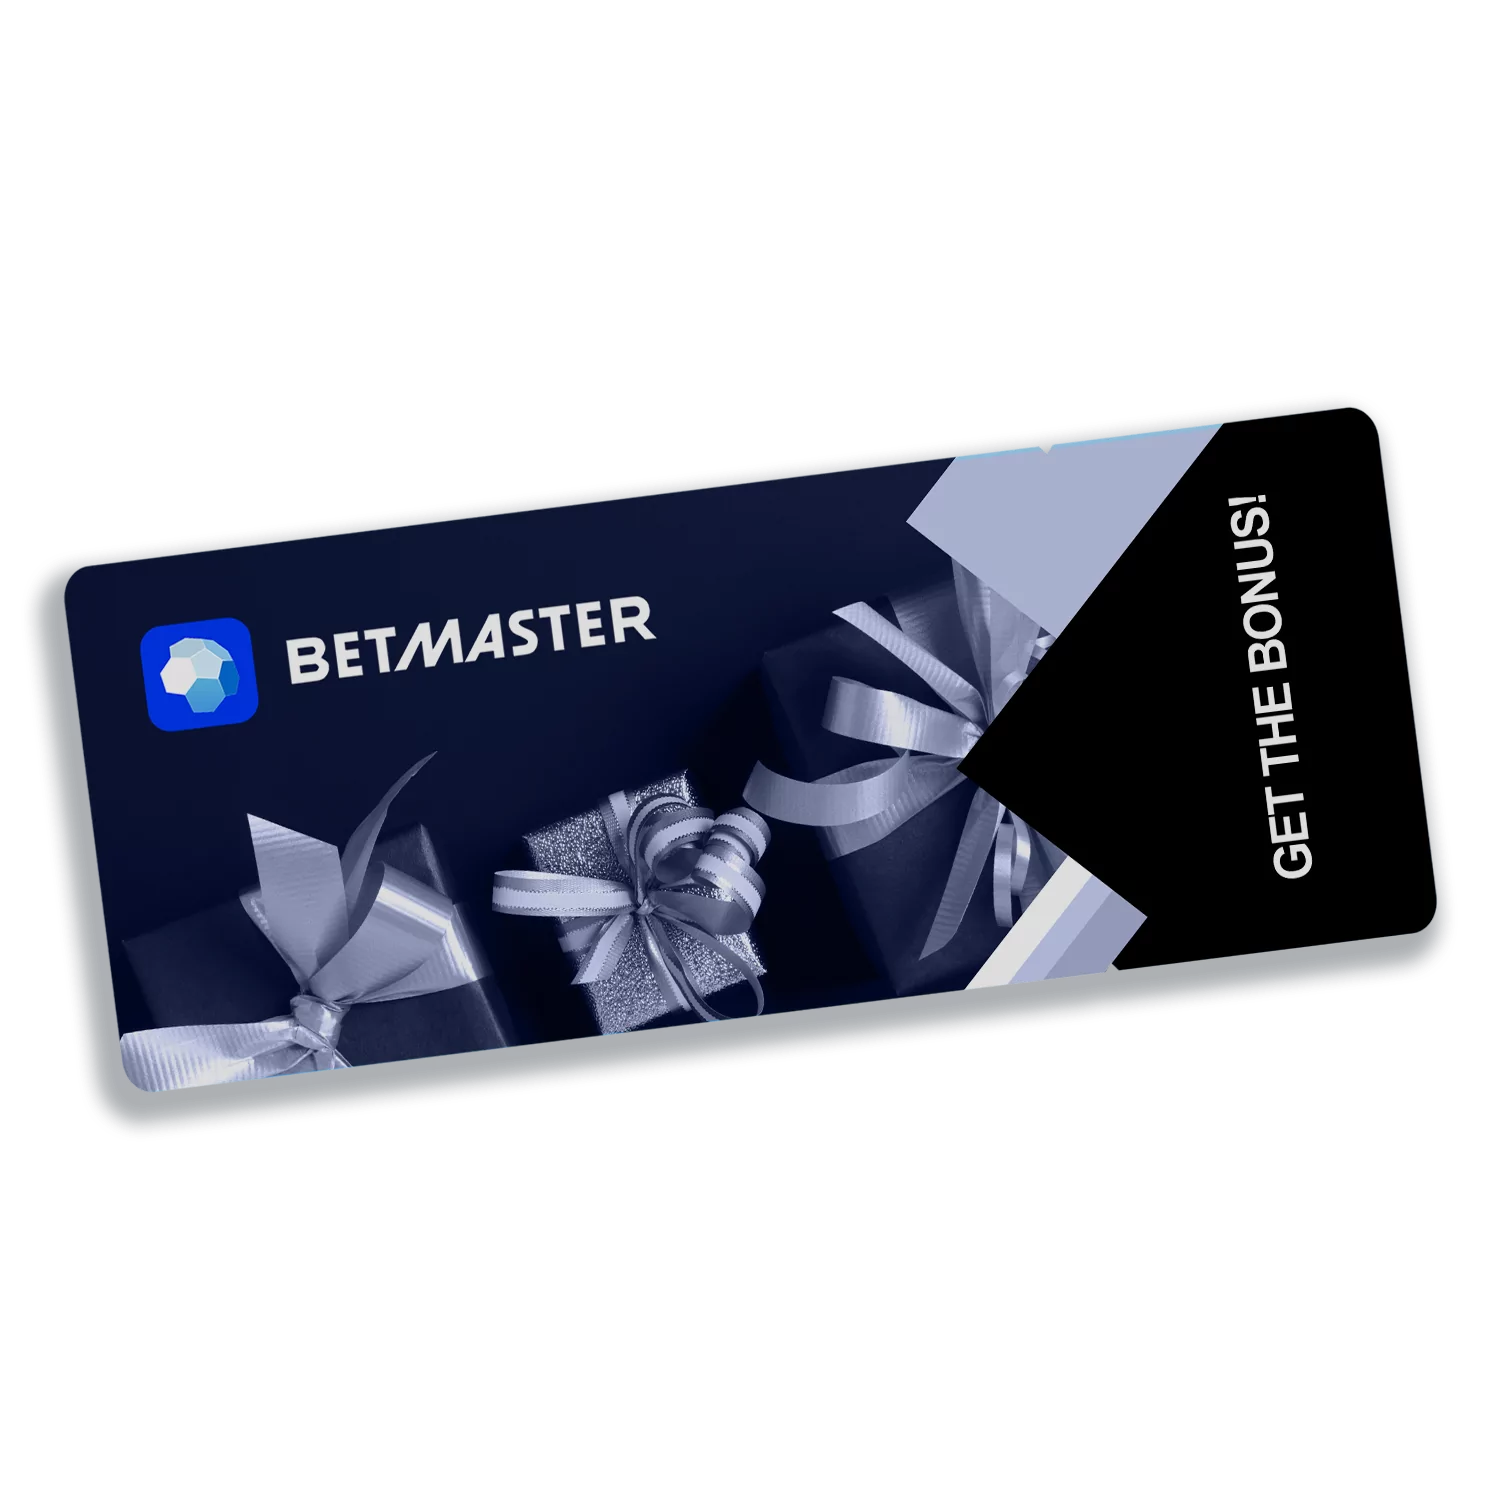 In this article, we share tips on how to get a bonus from the Betmaster bookmaker.